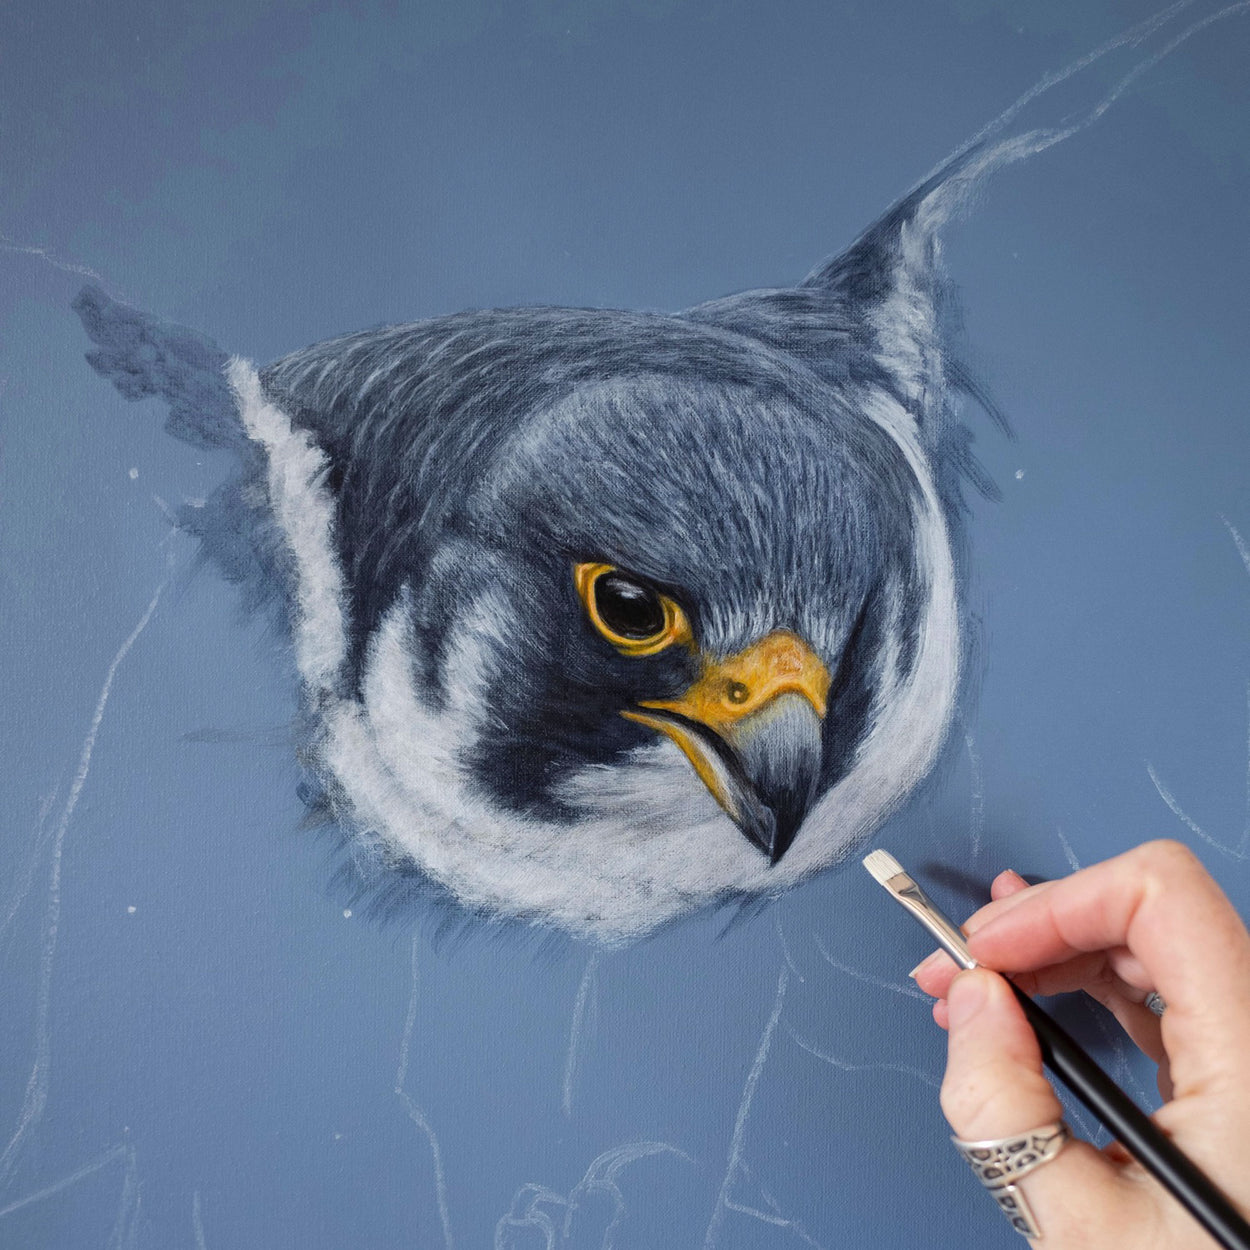 Image of a hand holding a paintbrush over a part-completed peregrine falcon painting